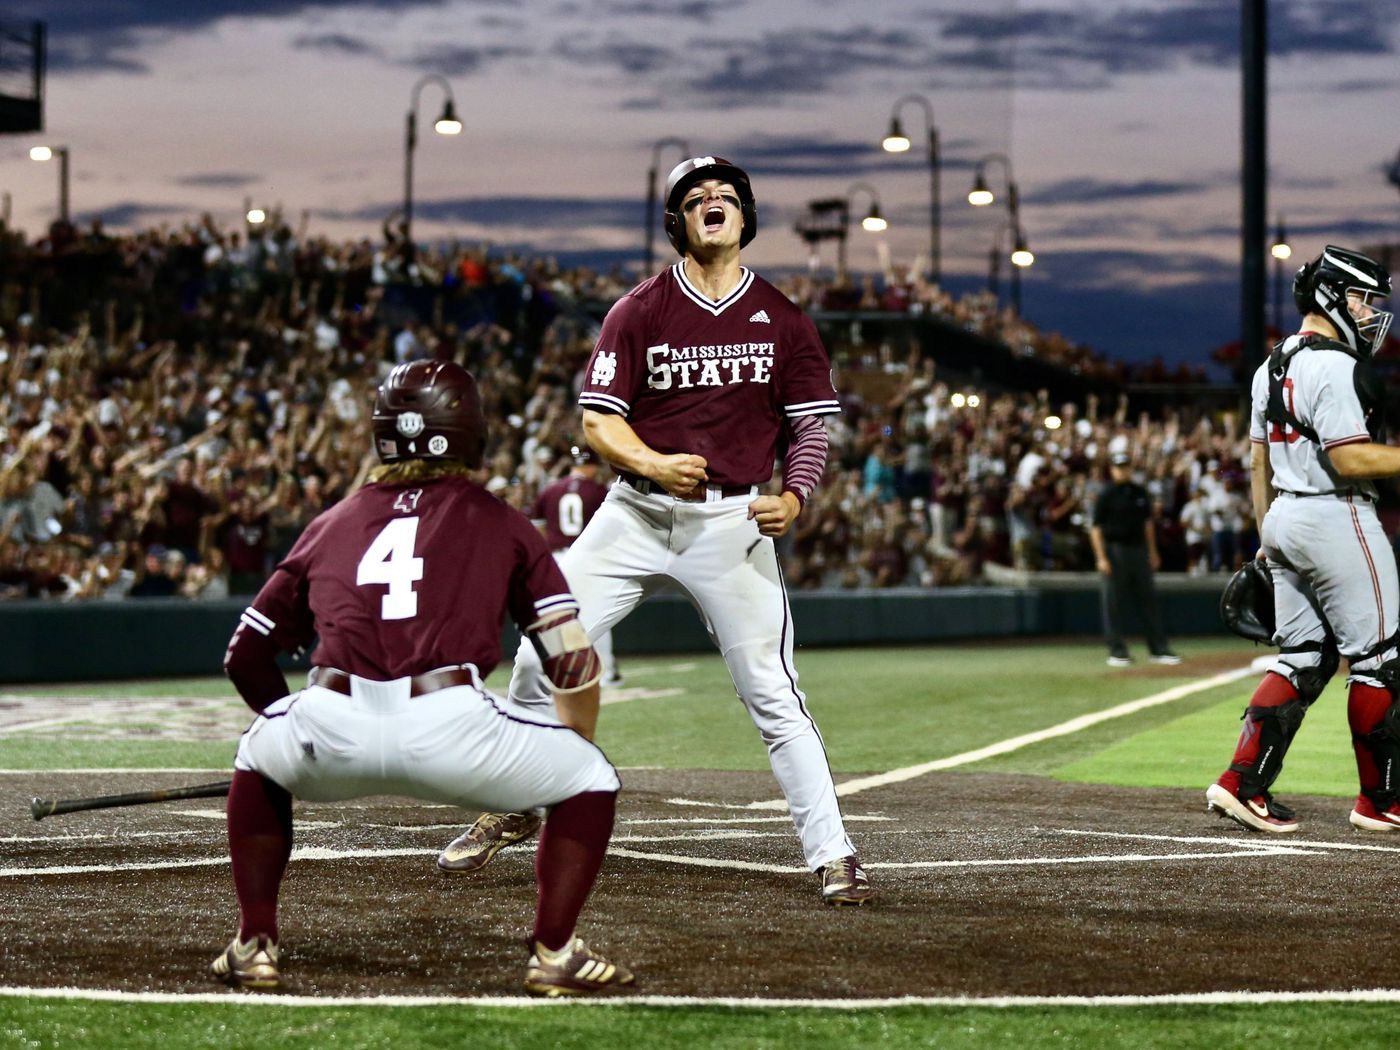 No. 3 Mississippi State Baseball Takes Care of No. 4 Stanford in Super Regional Opener Whom the Cowbell Tolls